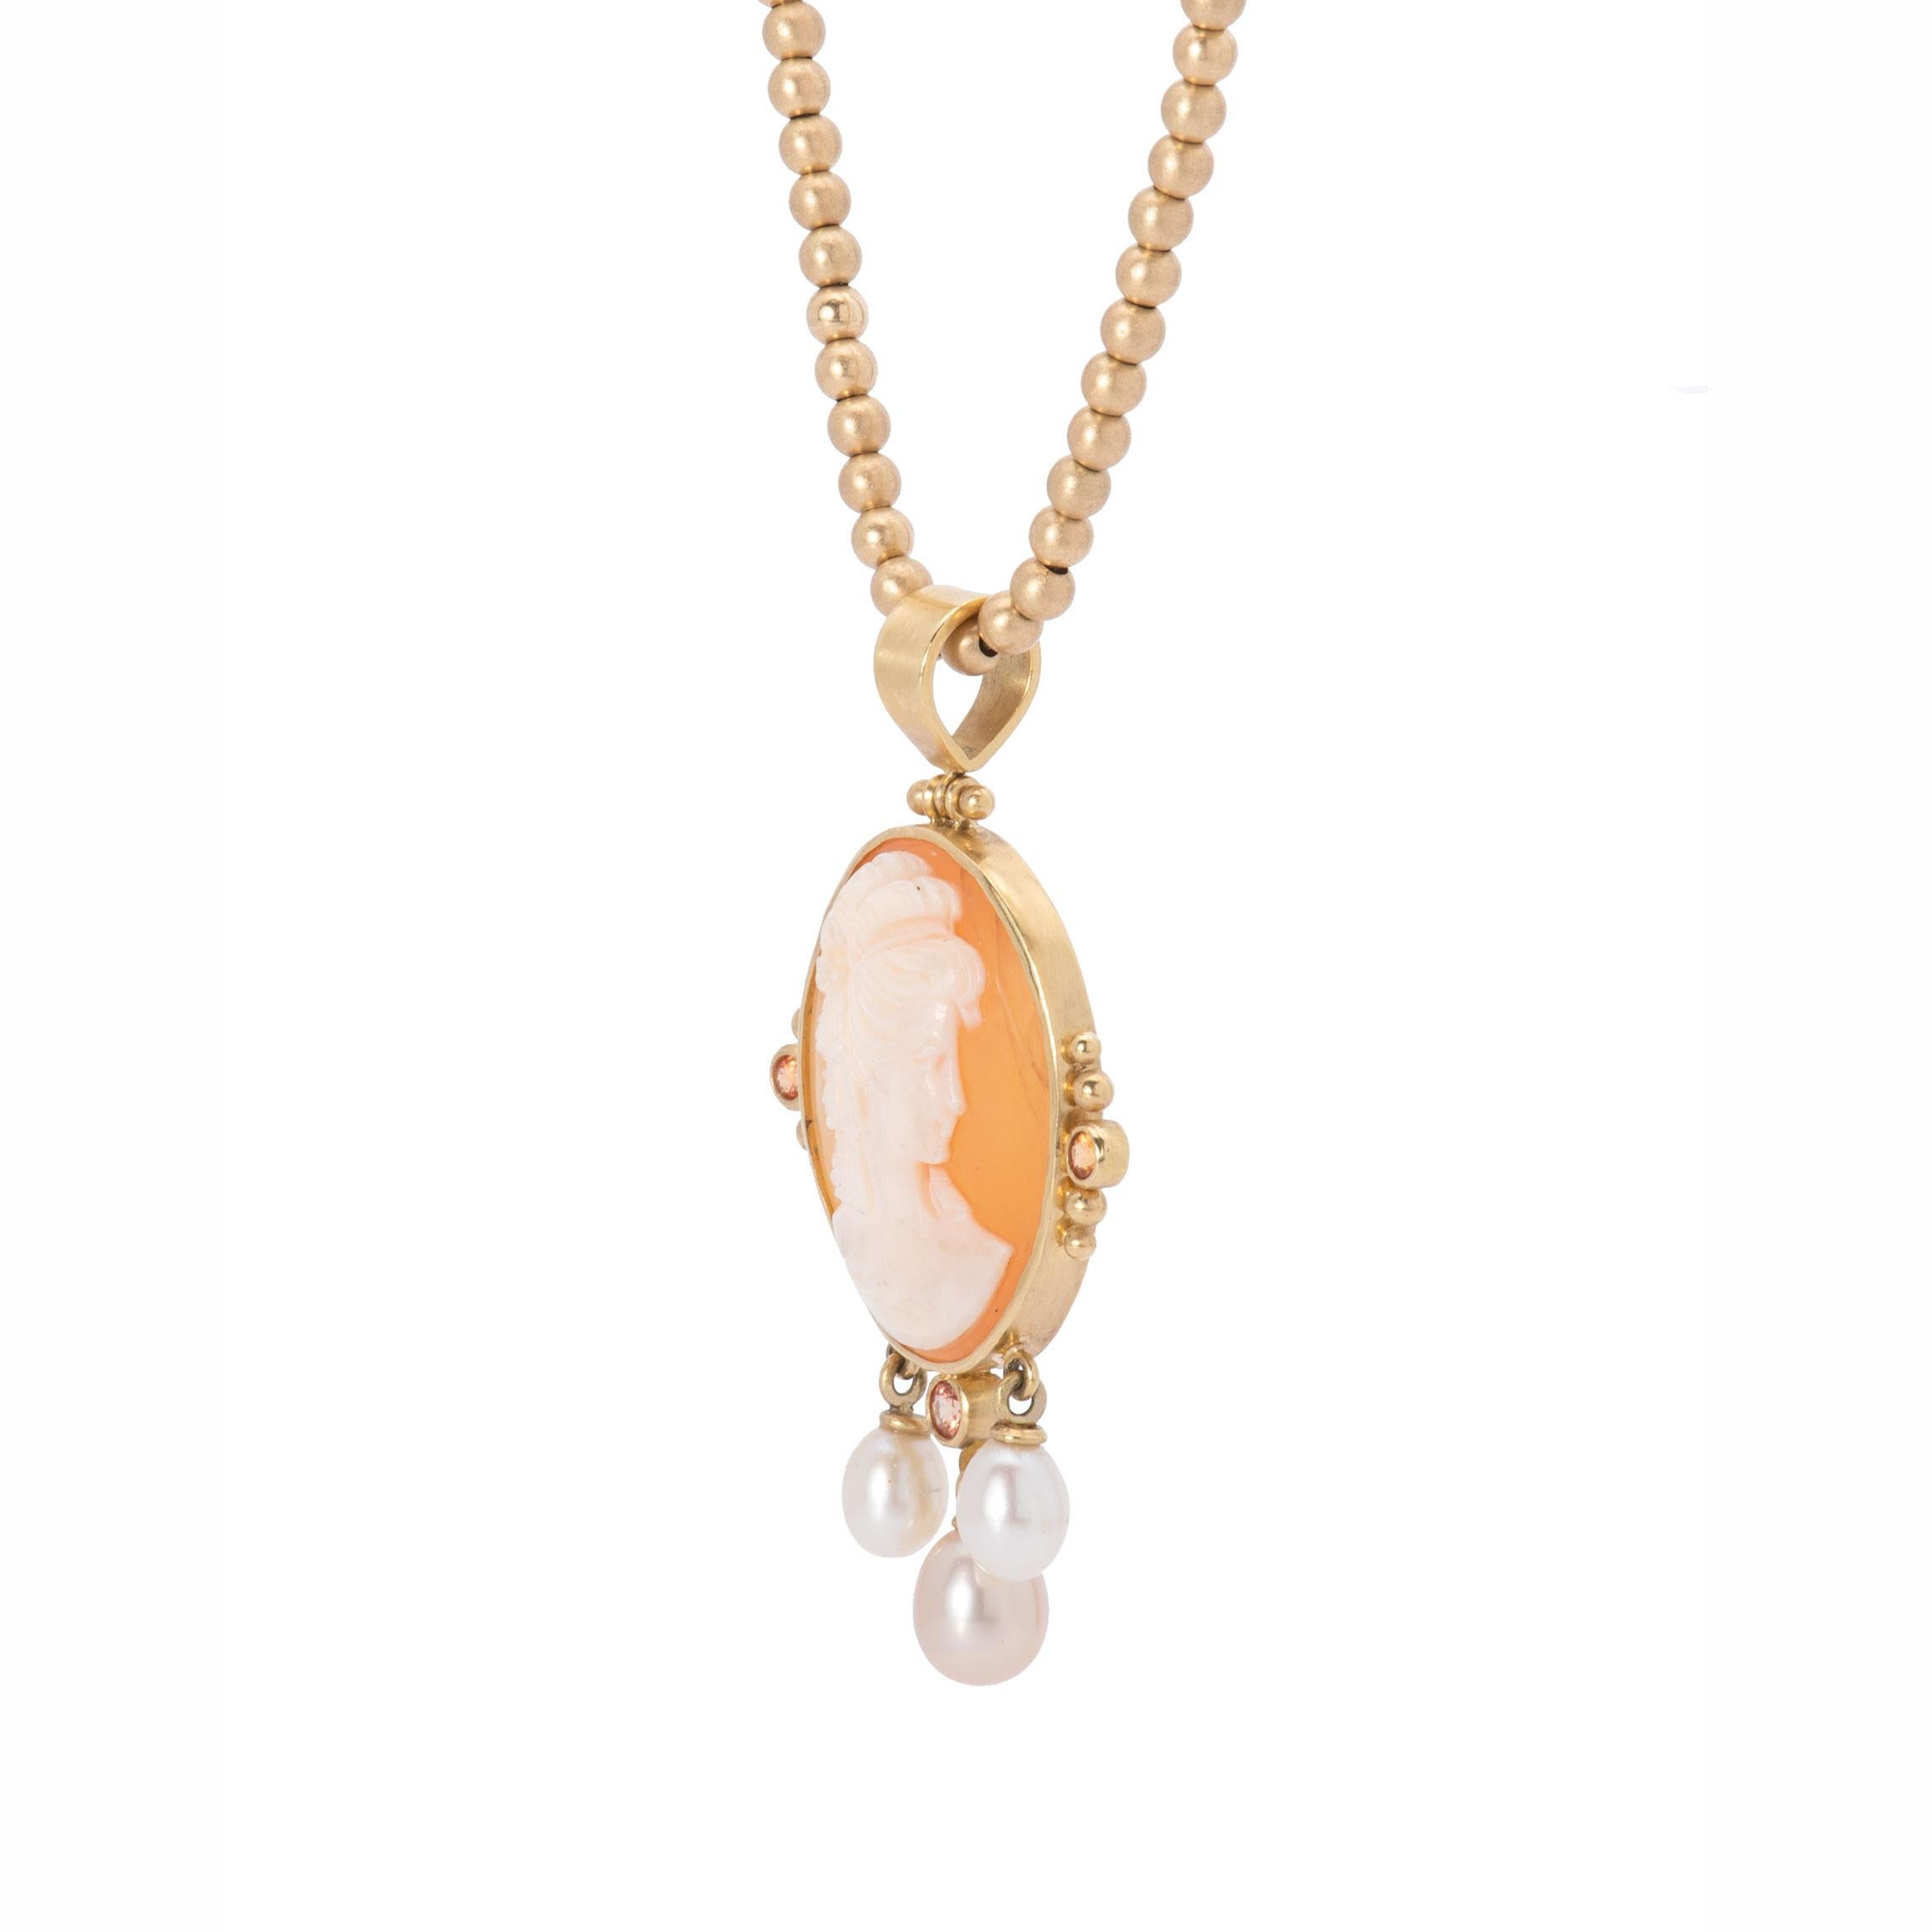 A classic carved shell cameo depicting the profile of a Regency-era lady is bezeled in 18k gold and fitted with gold beads, orange sapphires .28ctw and a generous hinged bail. The cameo and pearl pendant in 18k gold is embellished with a trio of